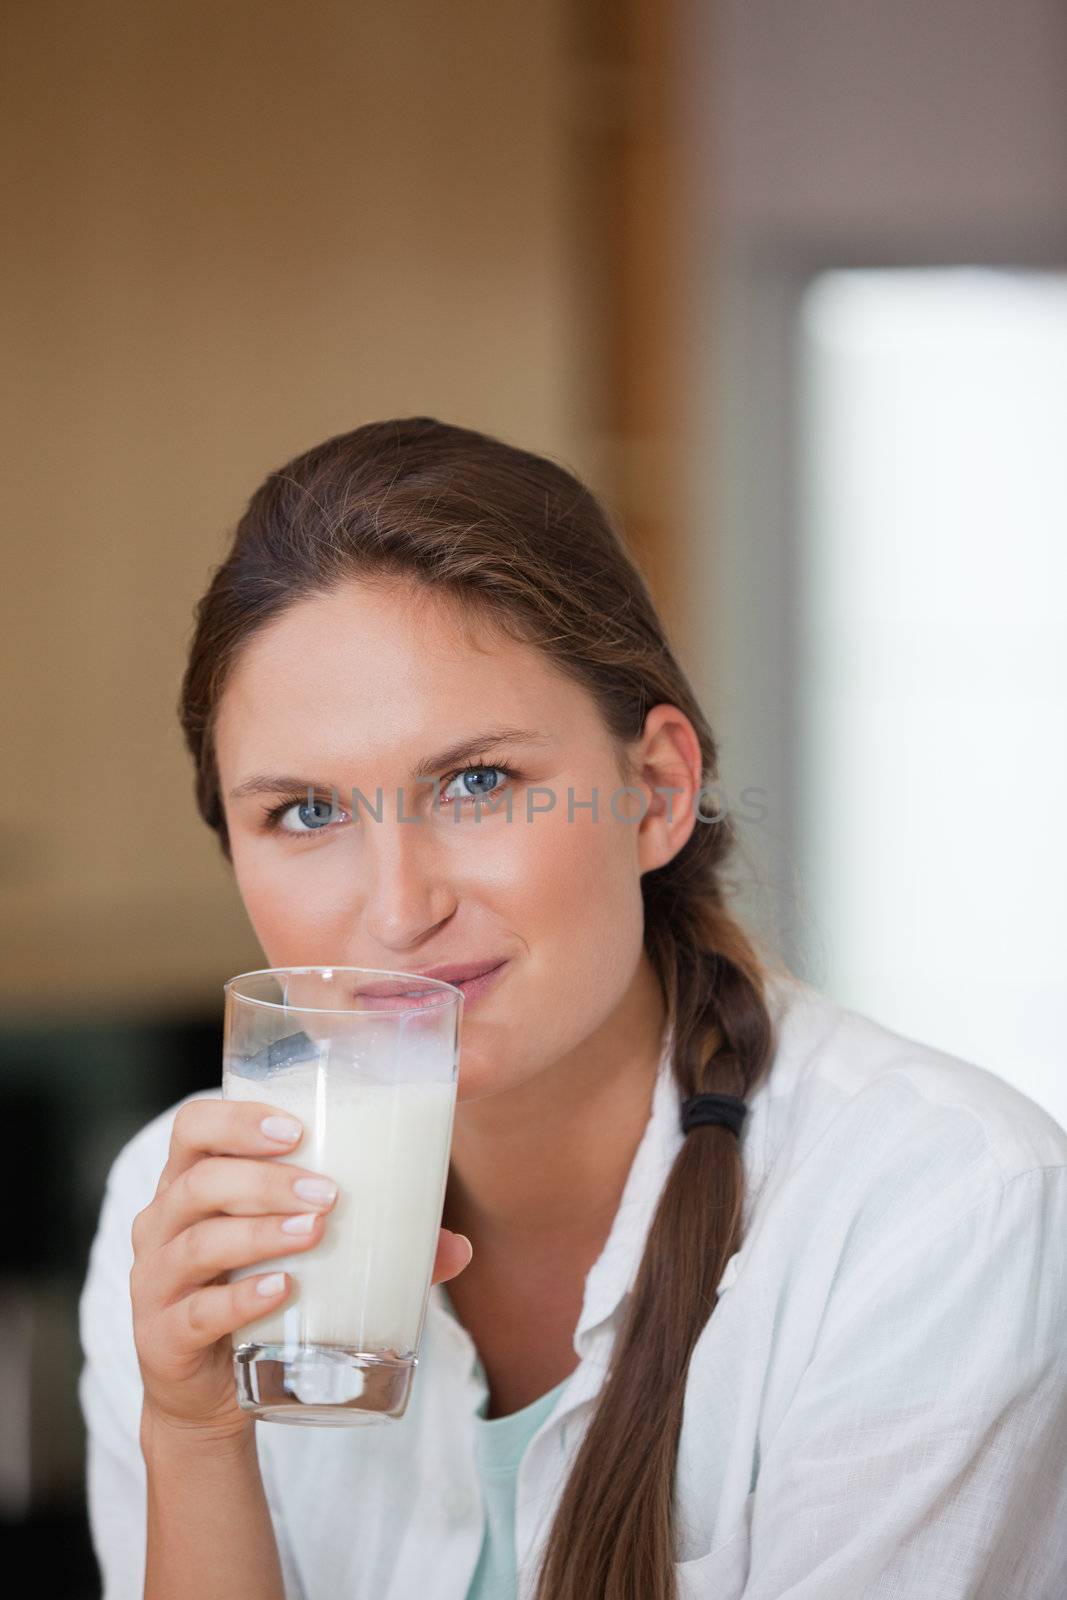 Woman drinking a glass of milk while looking the camera by Wavebreakmedia